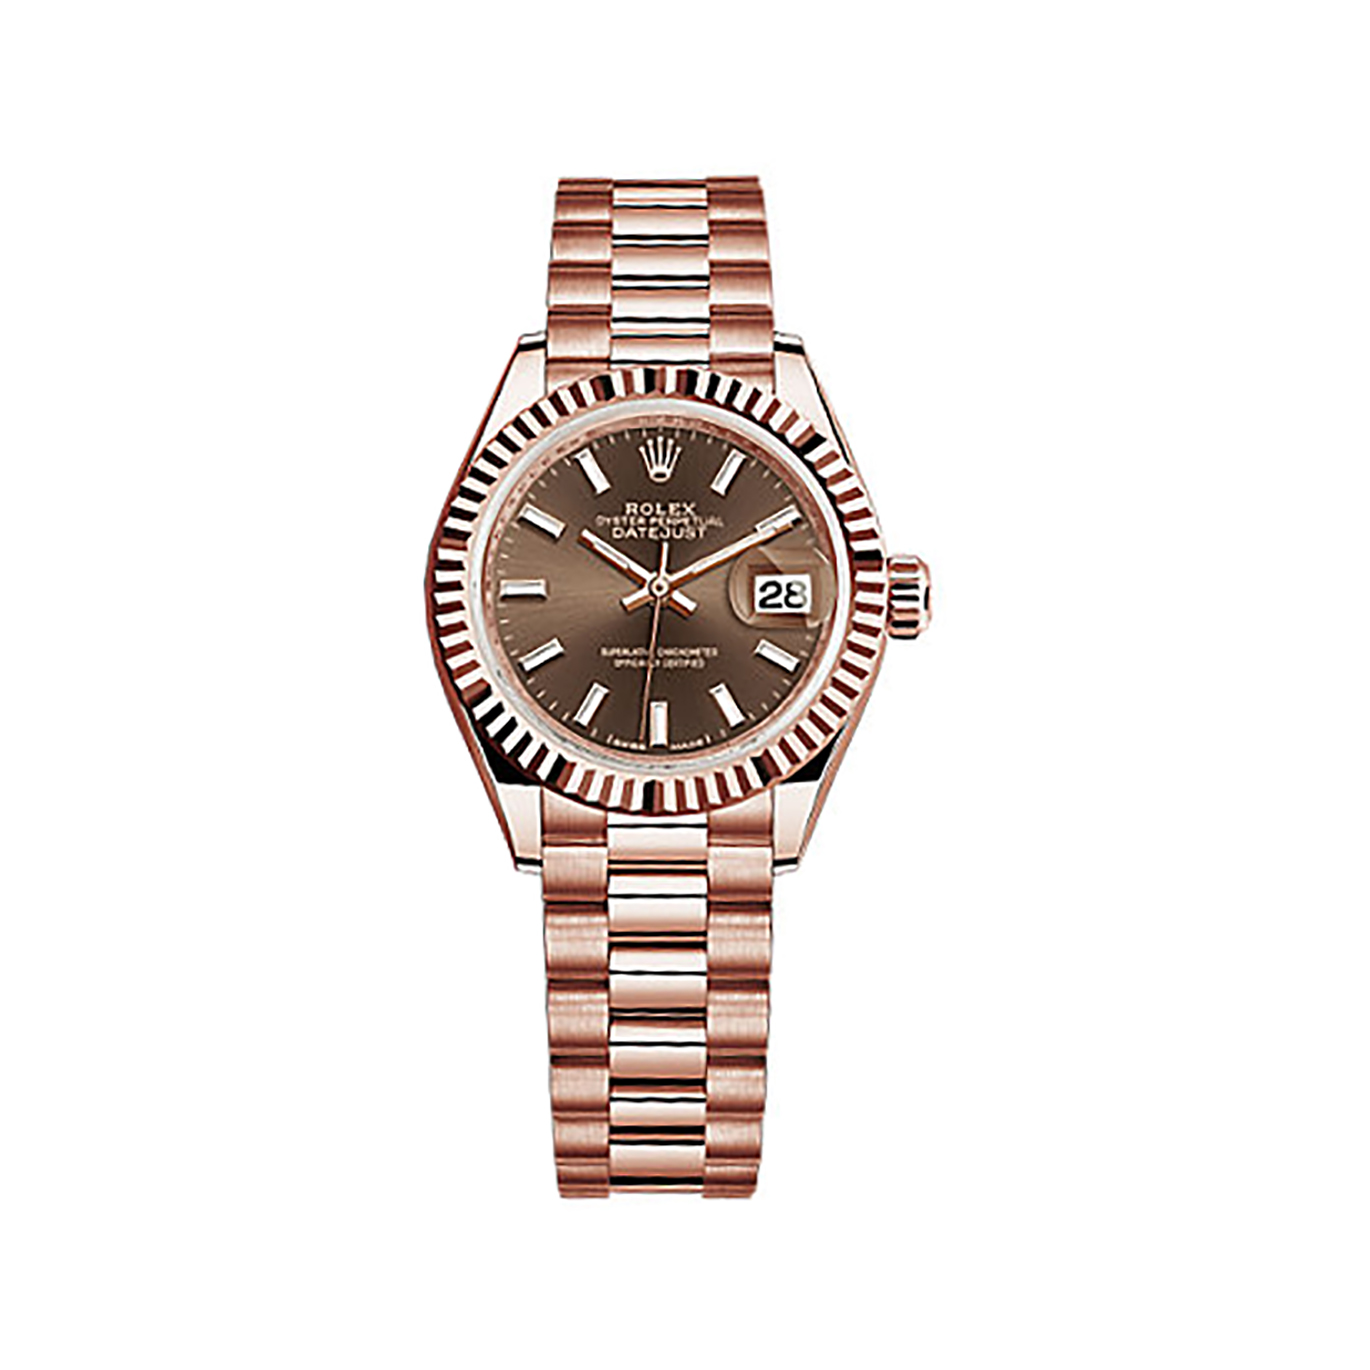 Lady-Datejust 28 279175 Rose Gold Watch (Chocolate) - Click Image to Close